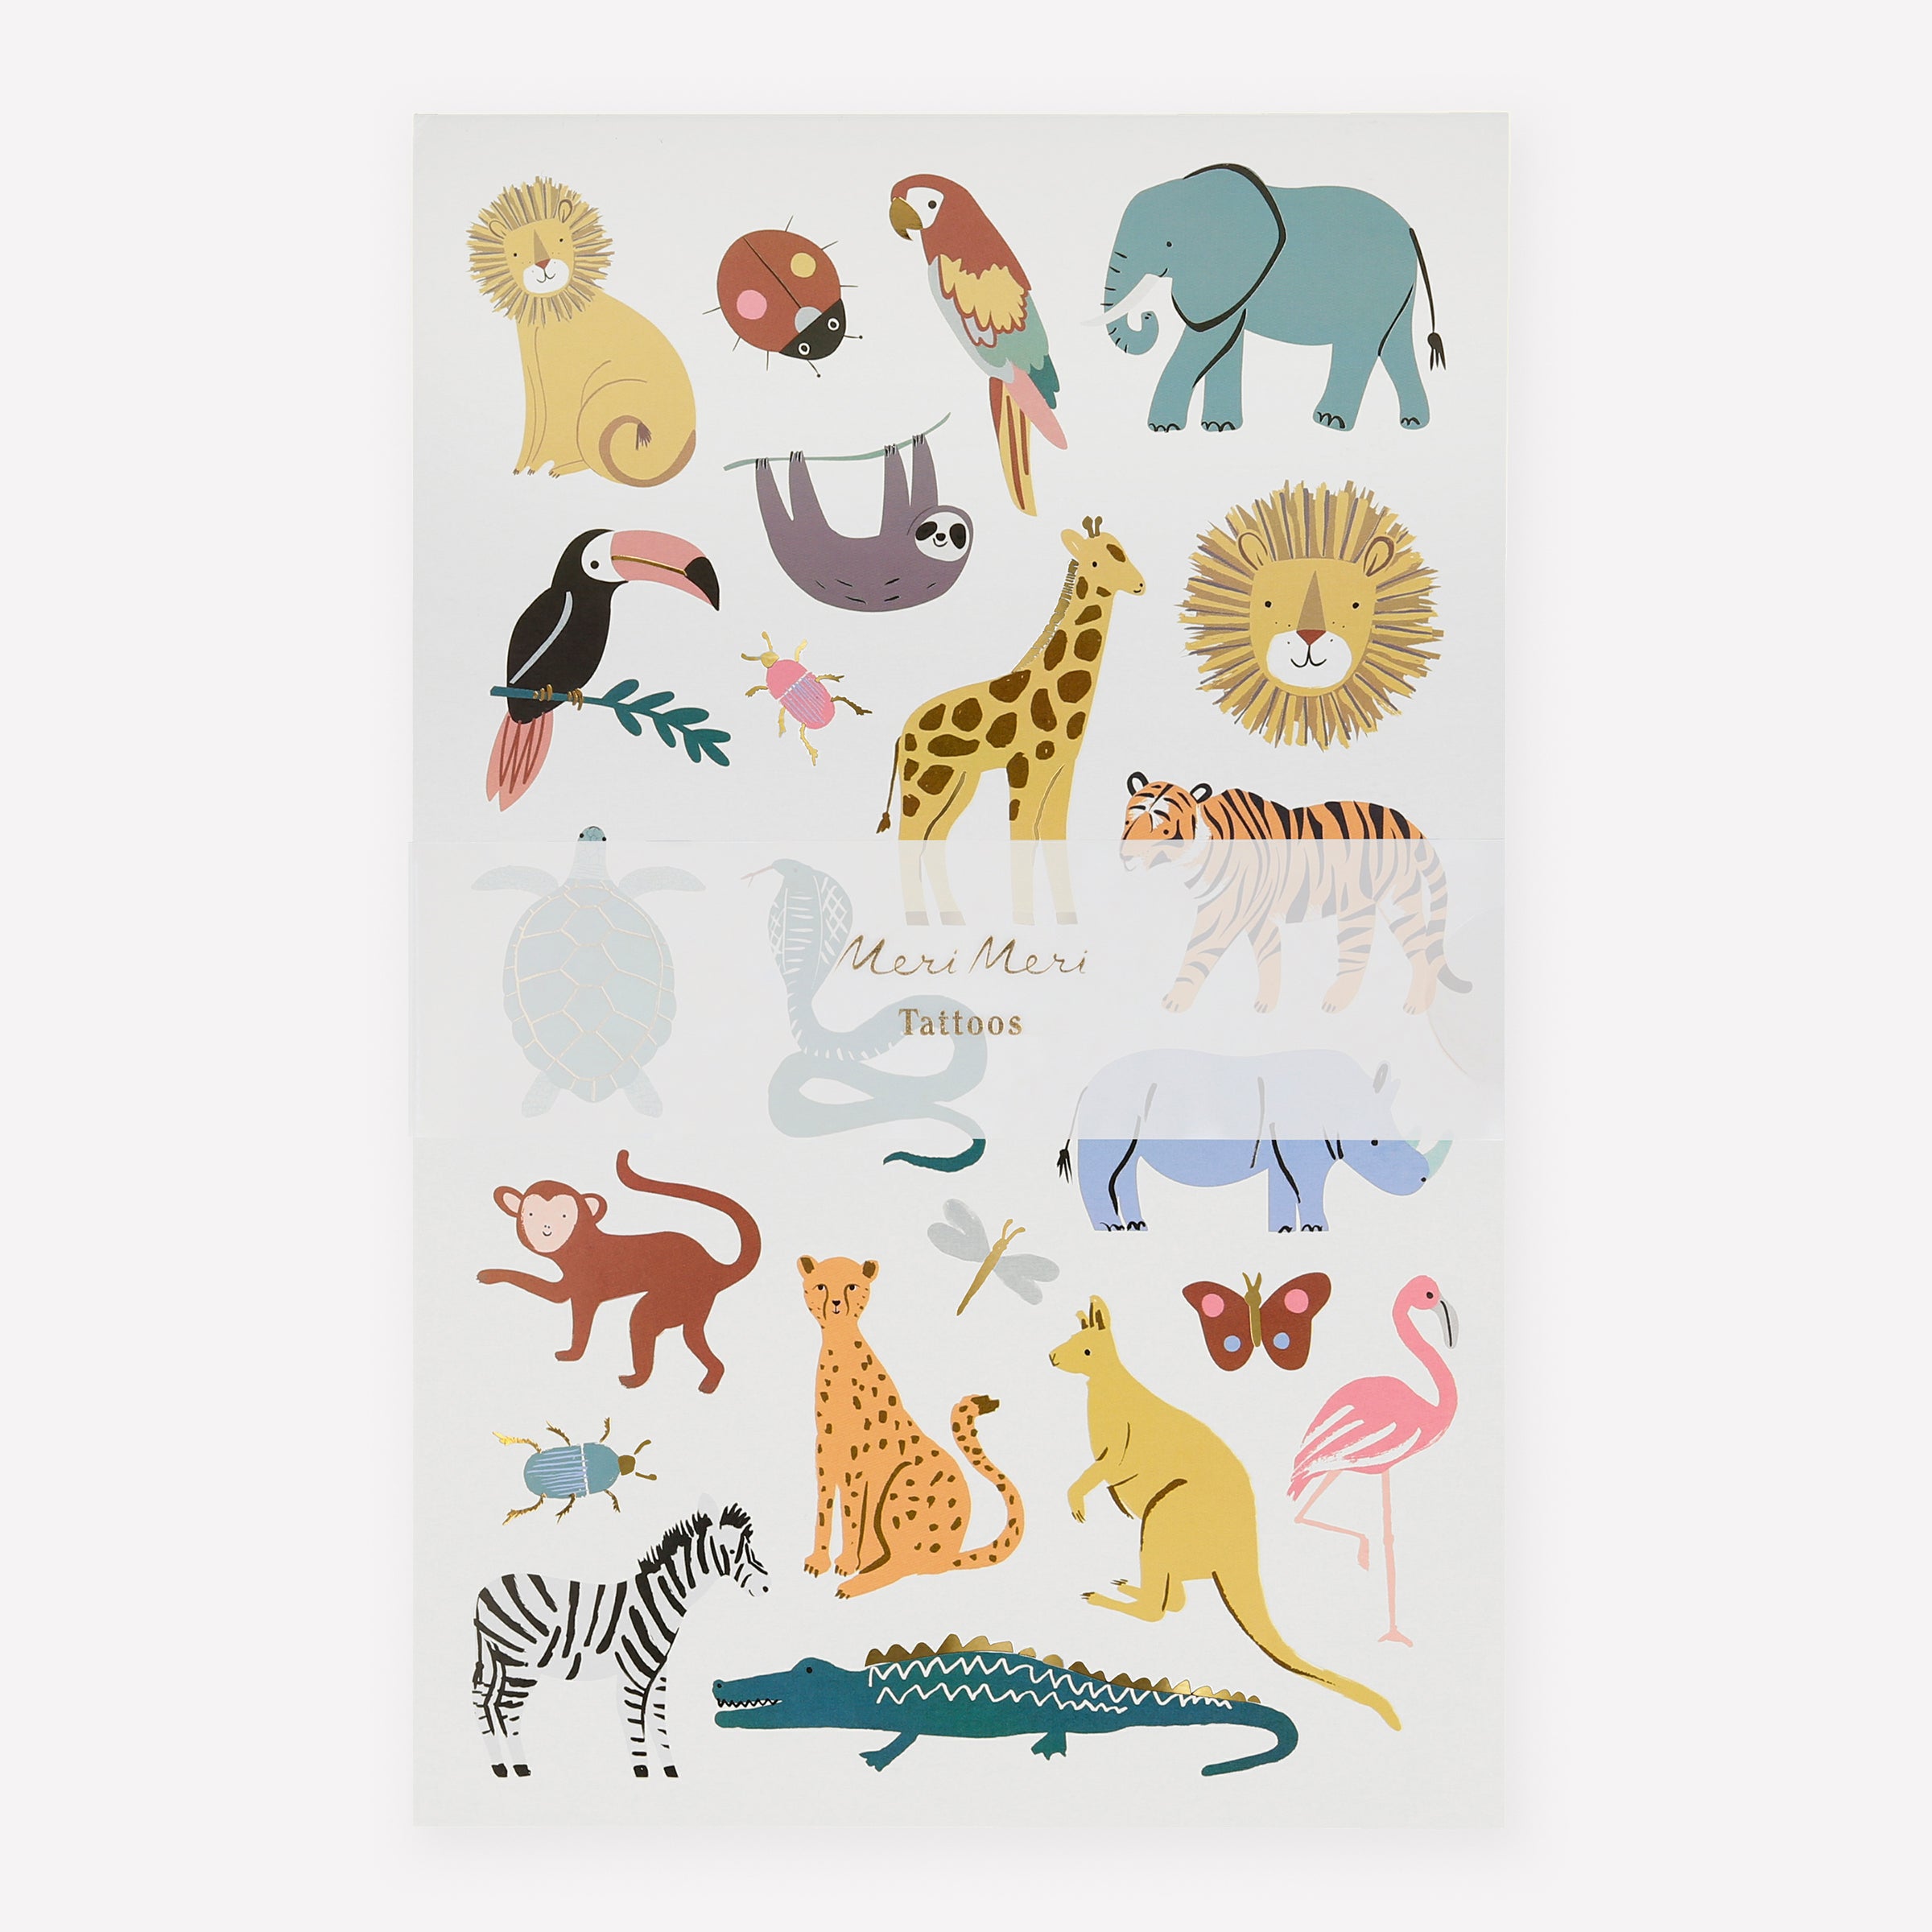 Our temporary tattoos for kids include animal designs that make cute tattoos.